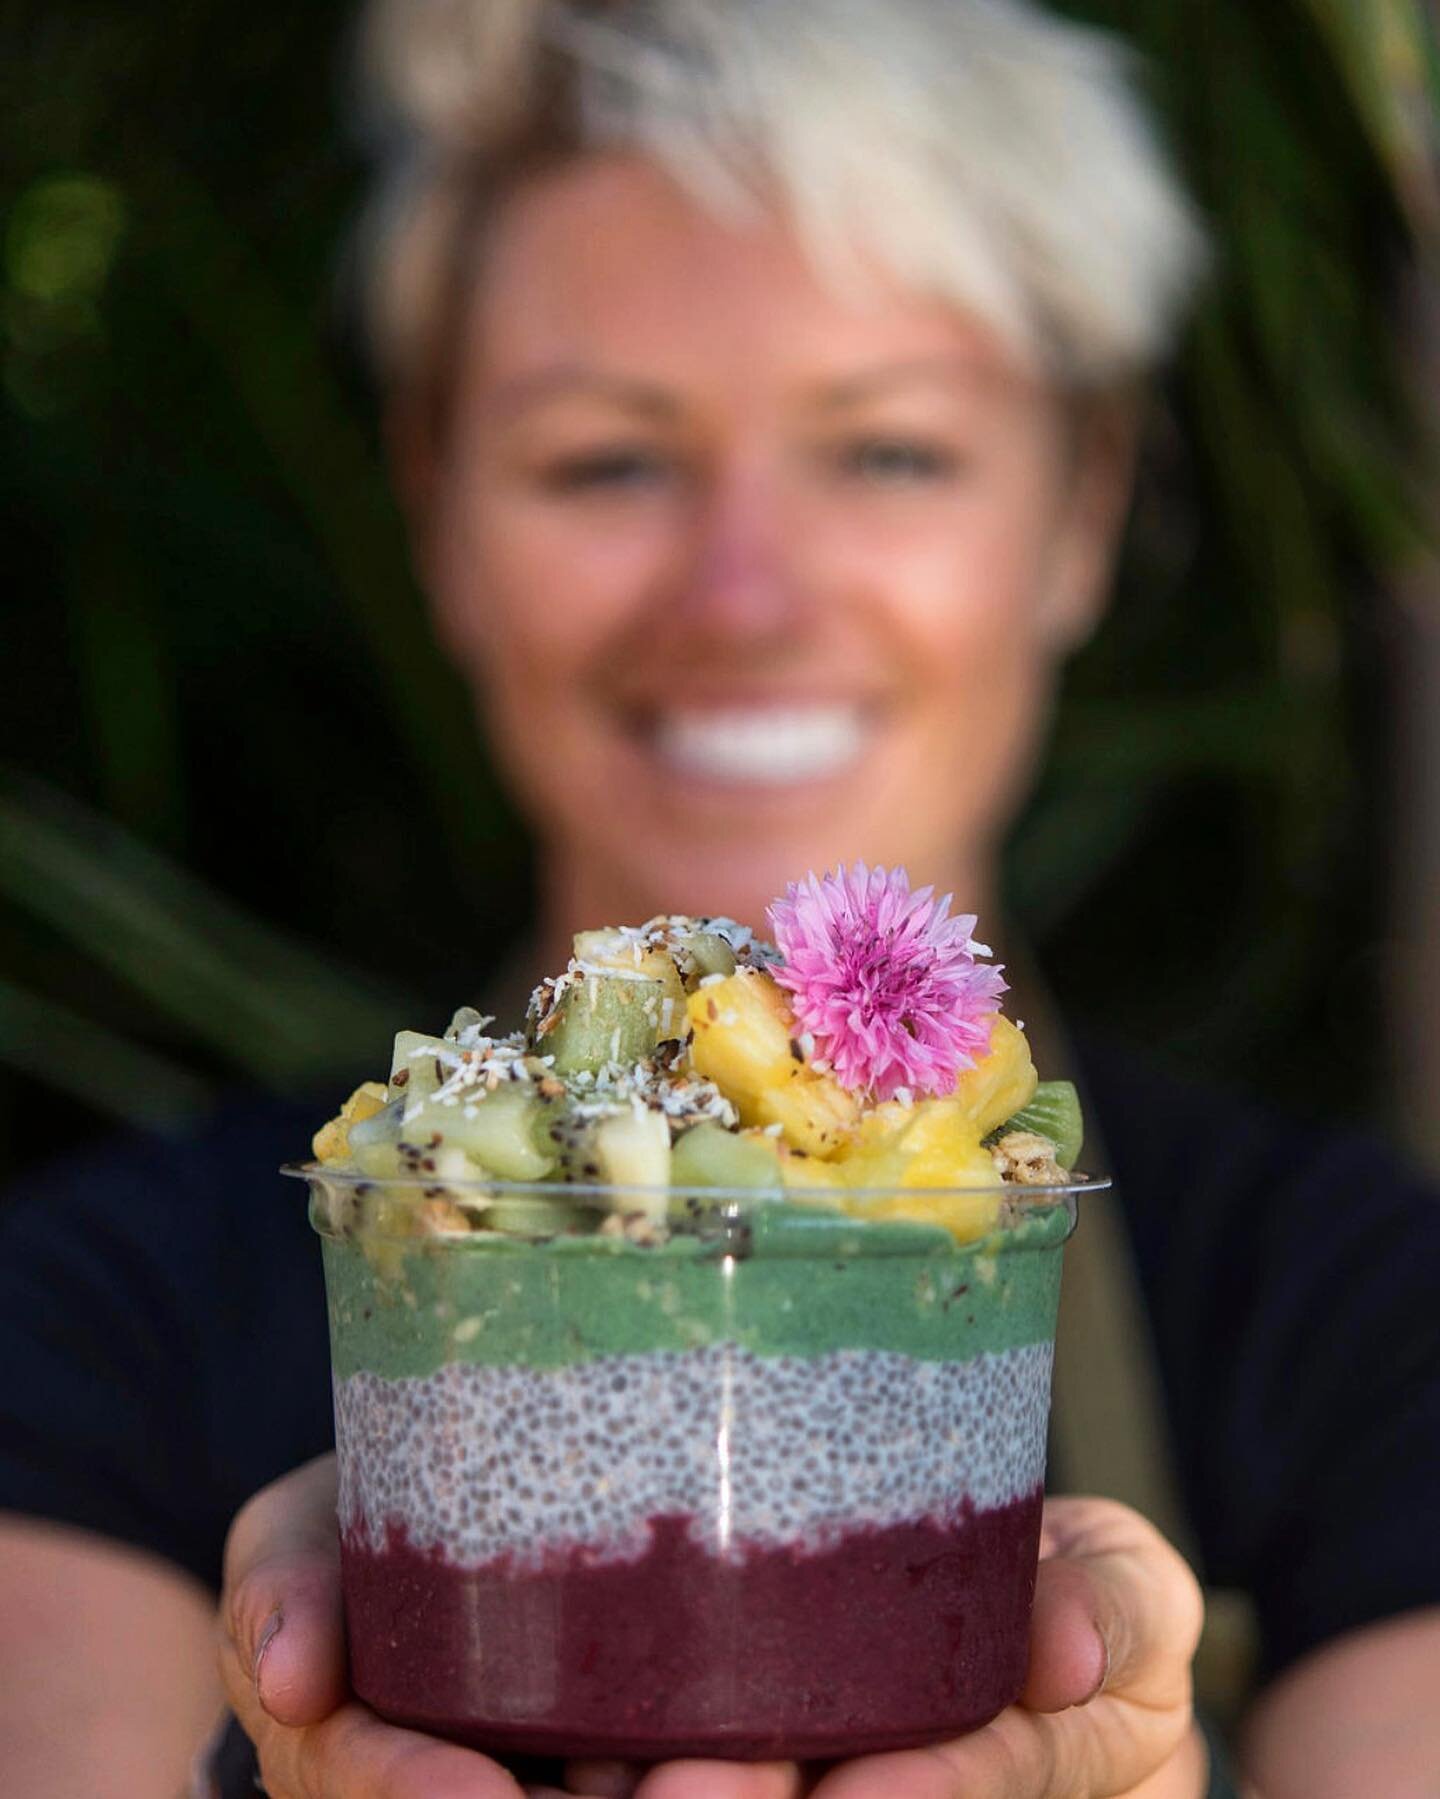 Who will we see first in line for that #brekkie at the farmer&rsquo;s market @waileavillage tomorrow (Tuesday) ?! Window opens at 8a, can&rsquo;t wait to see you there 🧡.
📸: @trishmichaelphotography
.
.
.
#acai #food #vegan #maui #smoothies #health